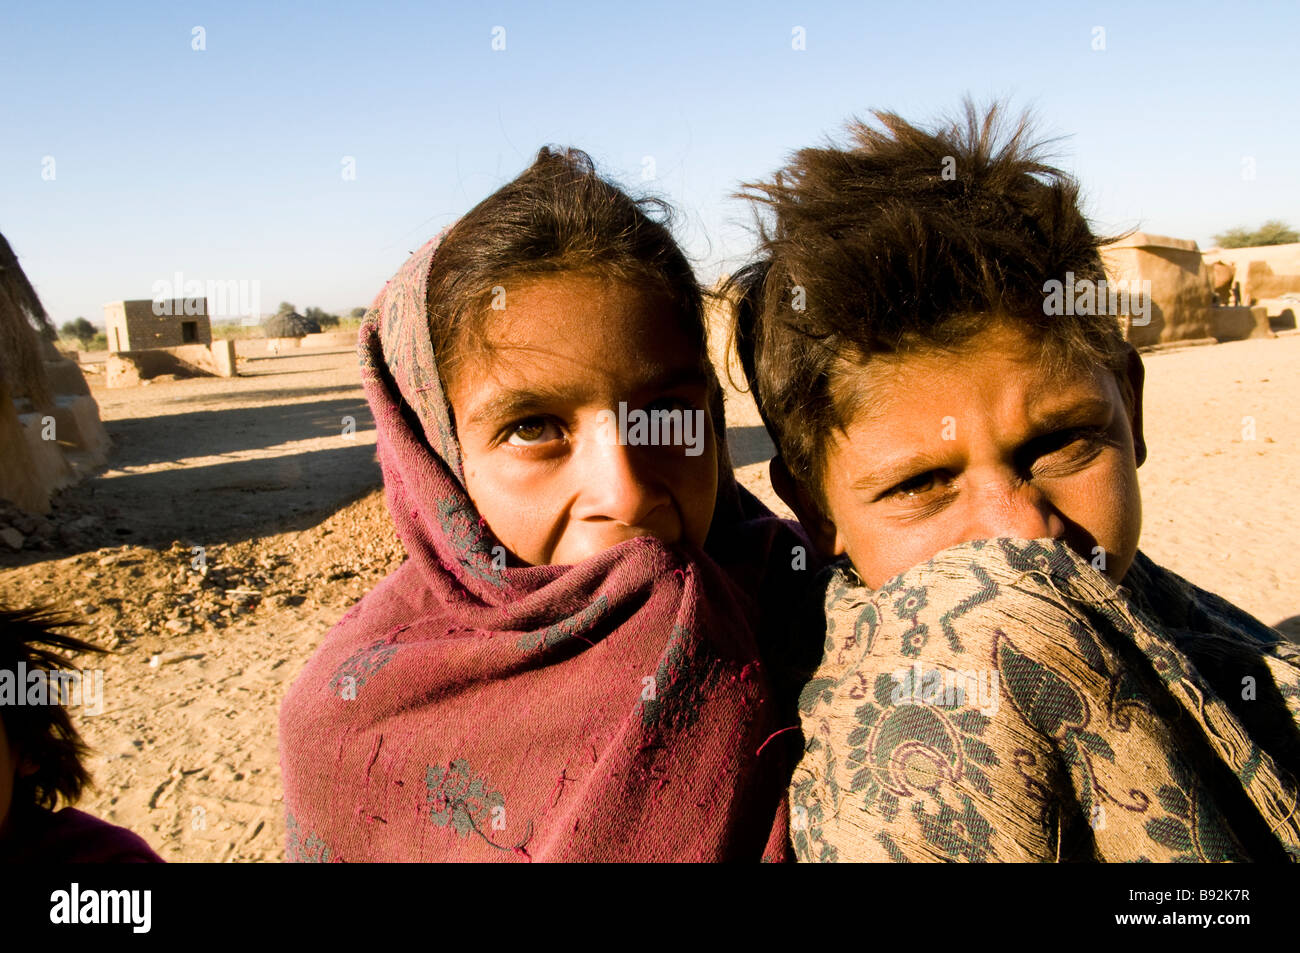 Portrait of a beautiful nomadic girl & boy from the western arid regions of Rajasthan, India. Stock Photo